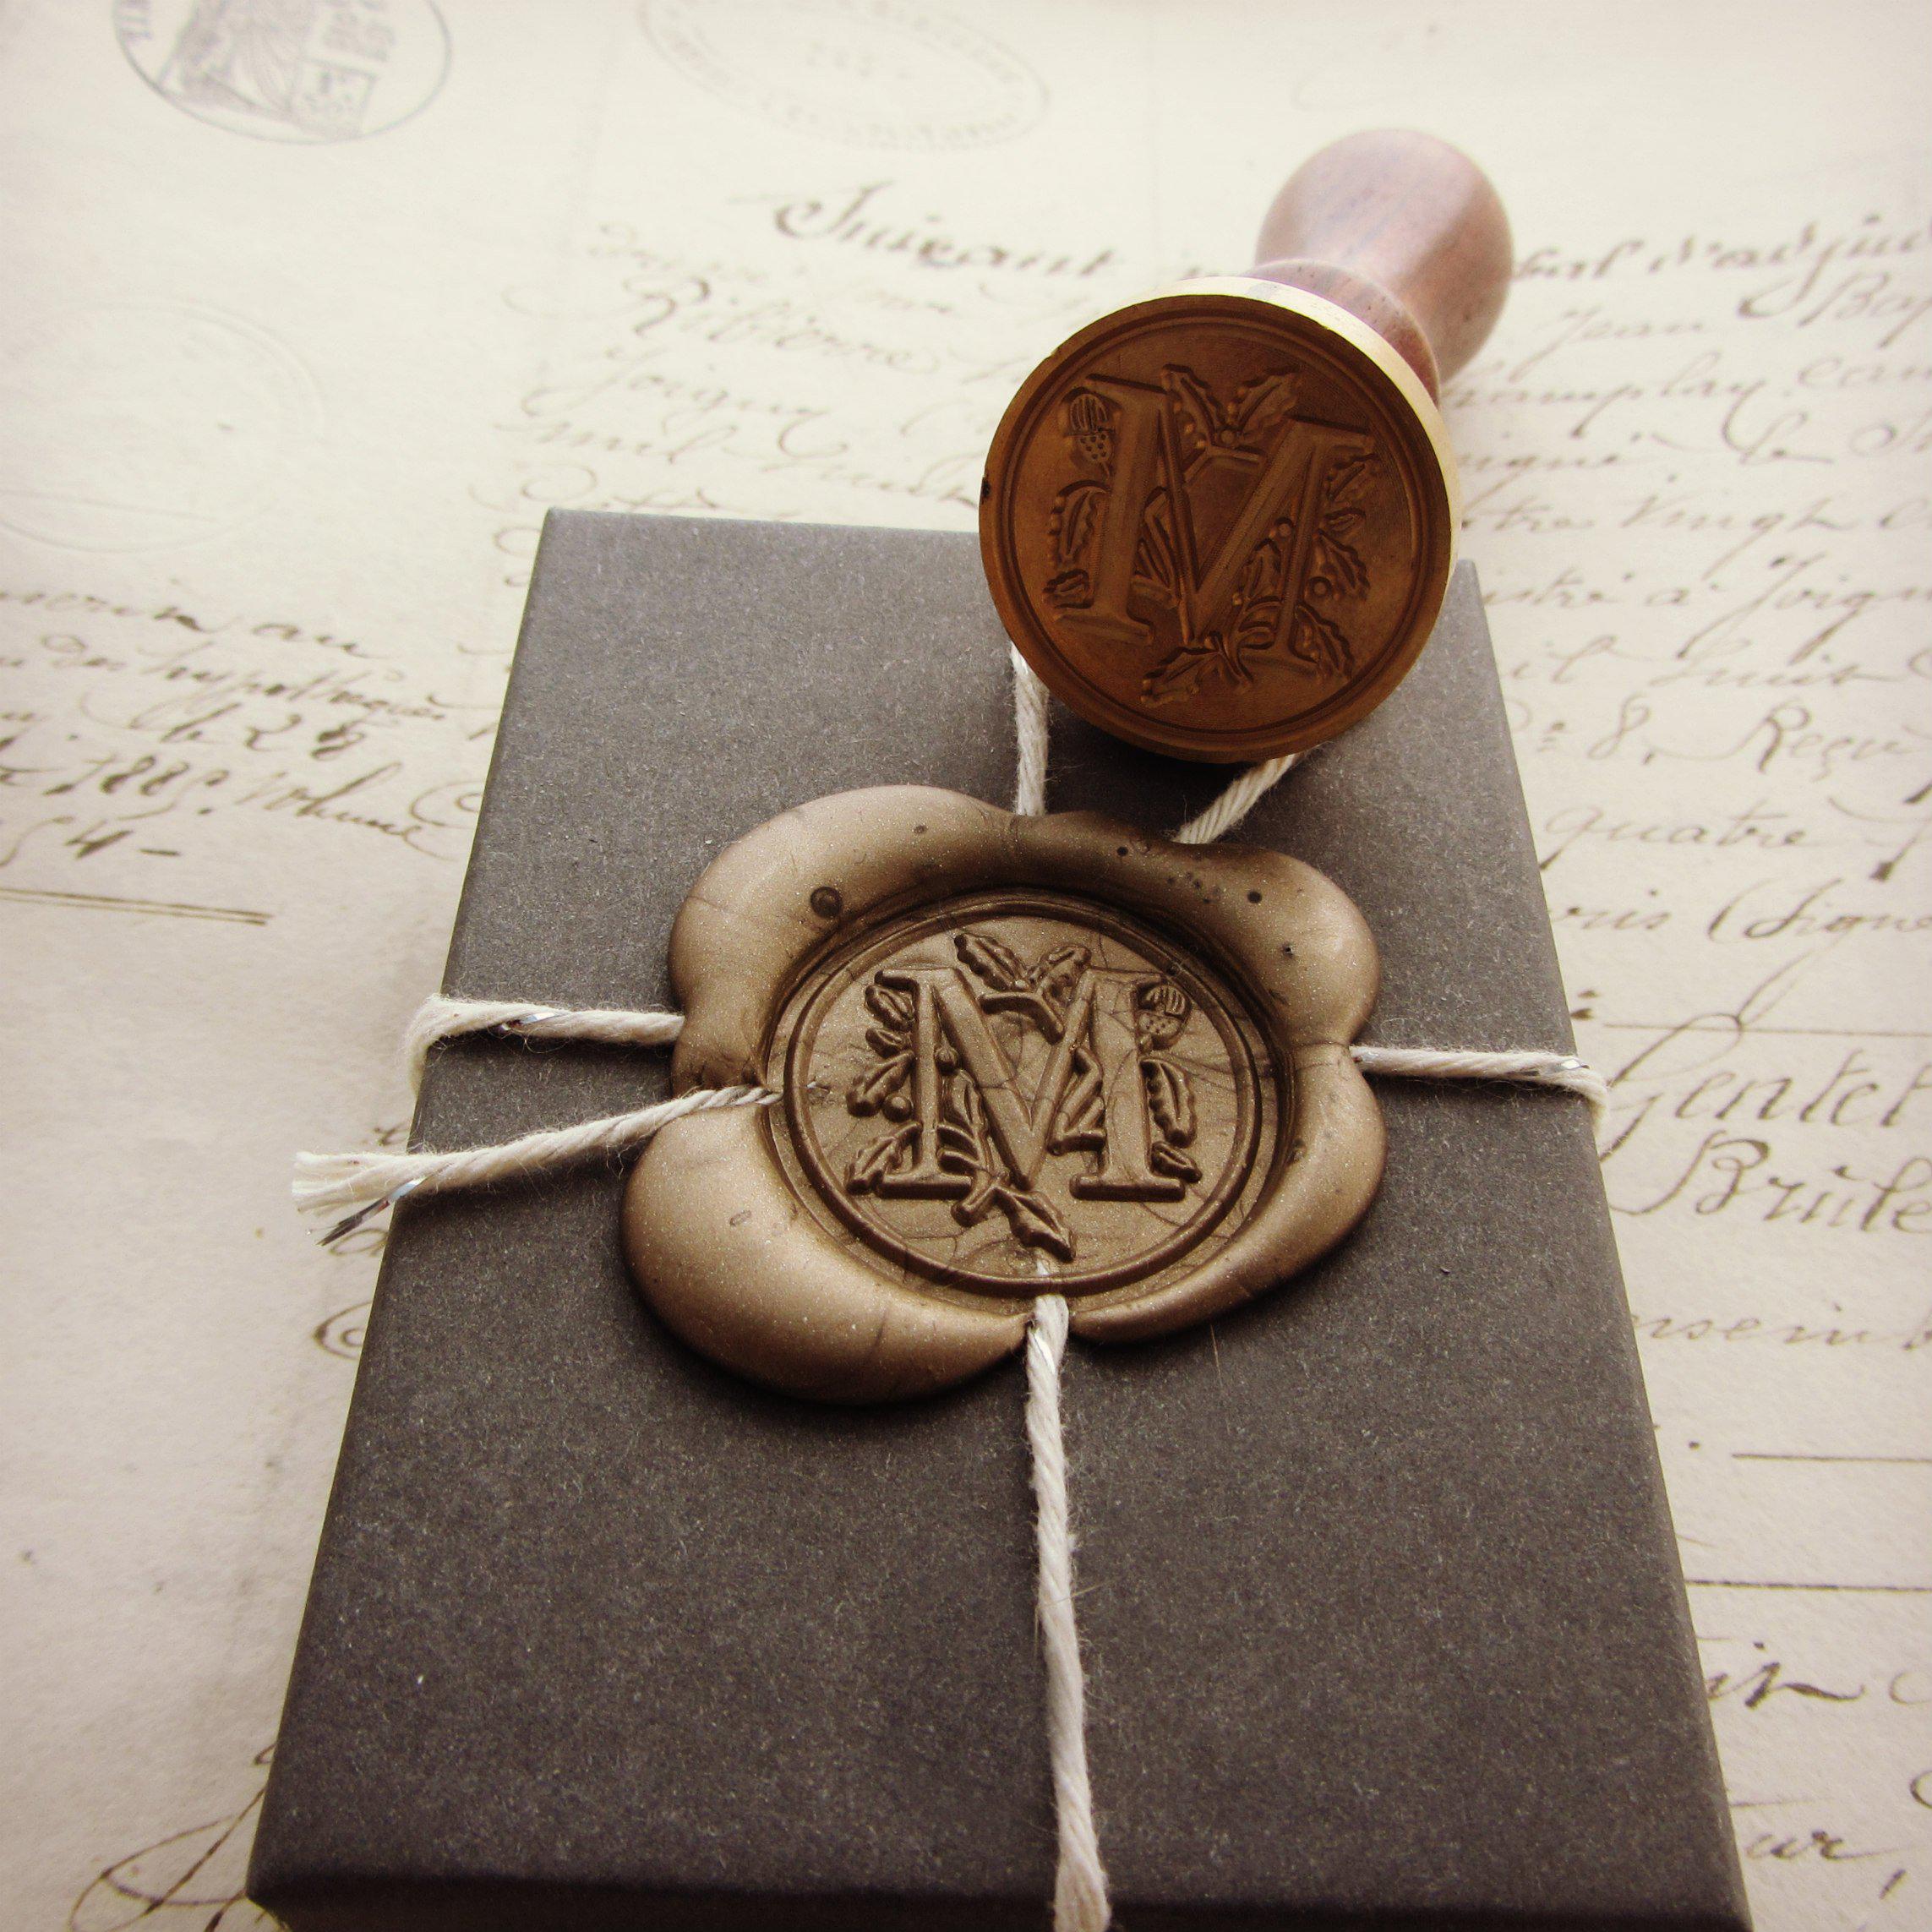 Custom made Wax Seal Stamp, any design, with box and accessories